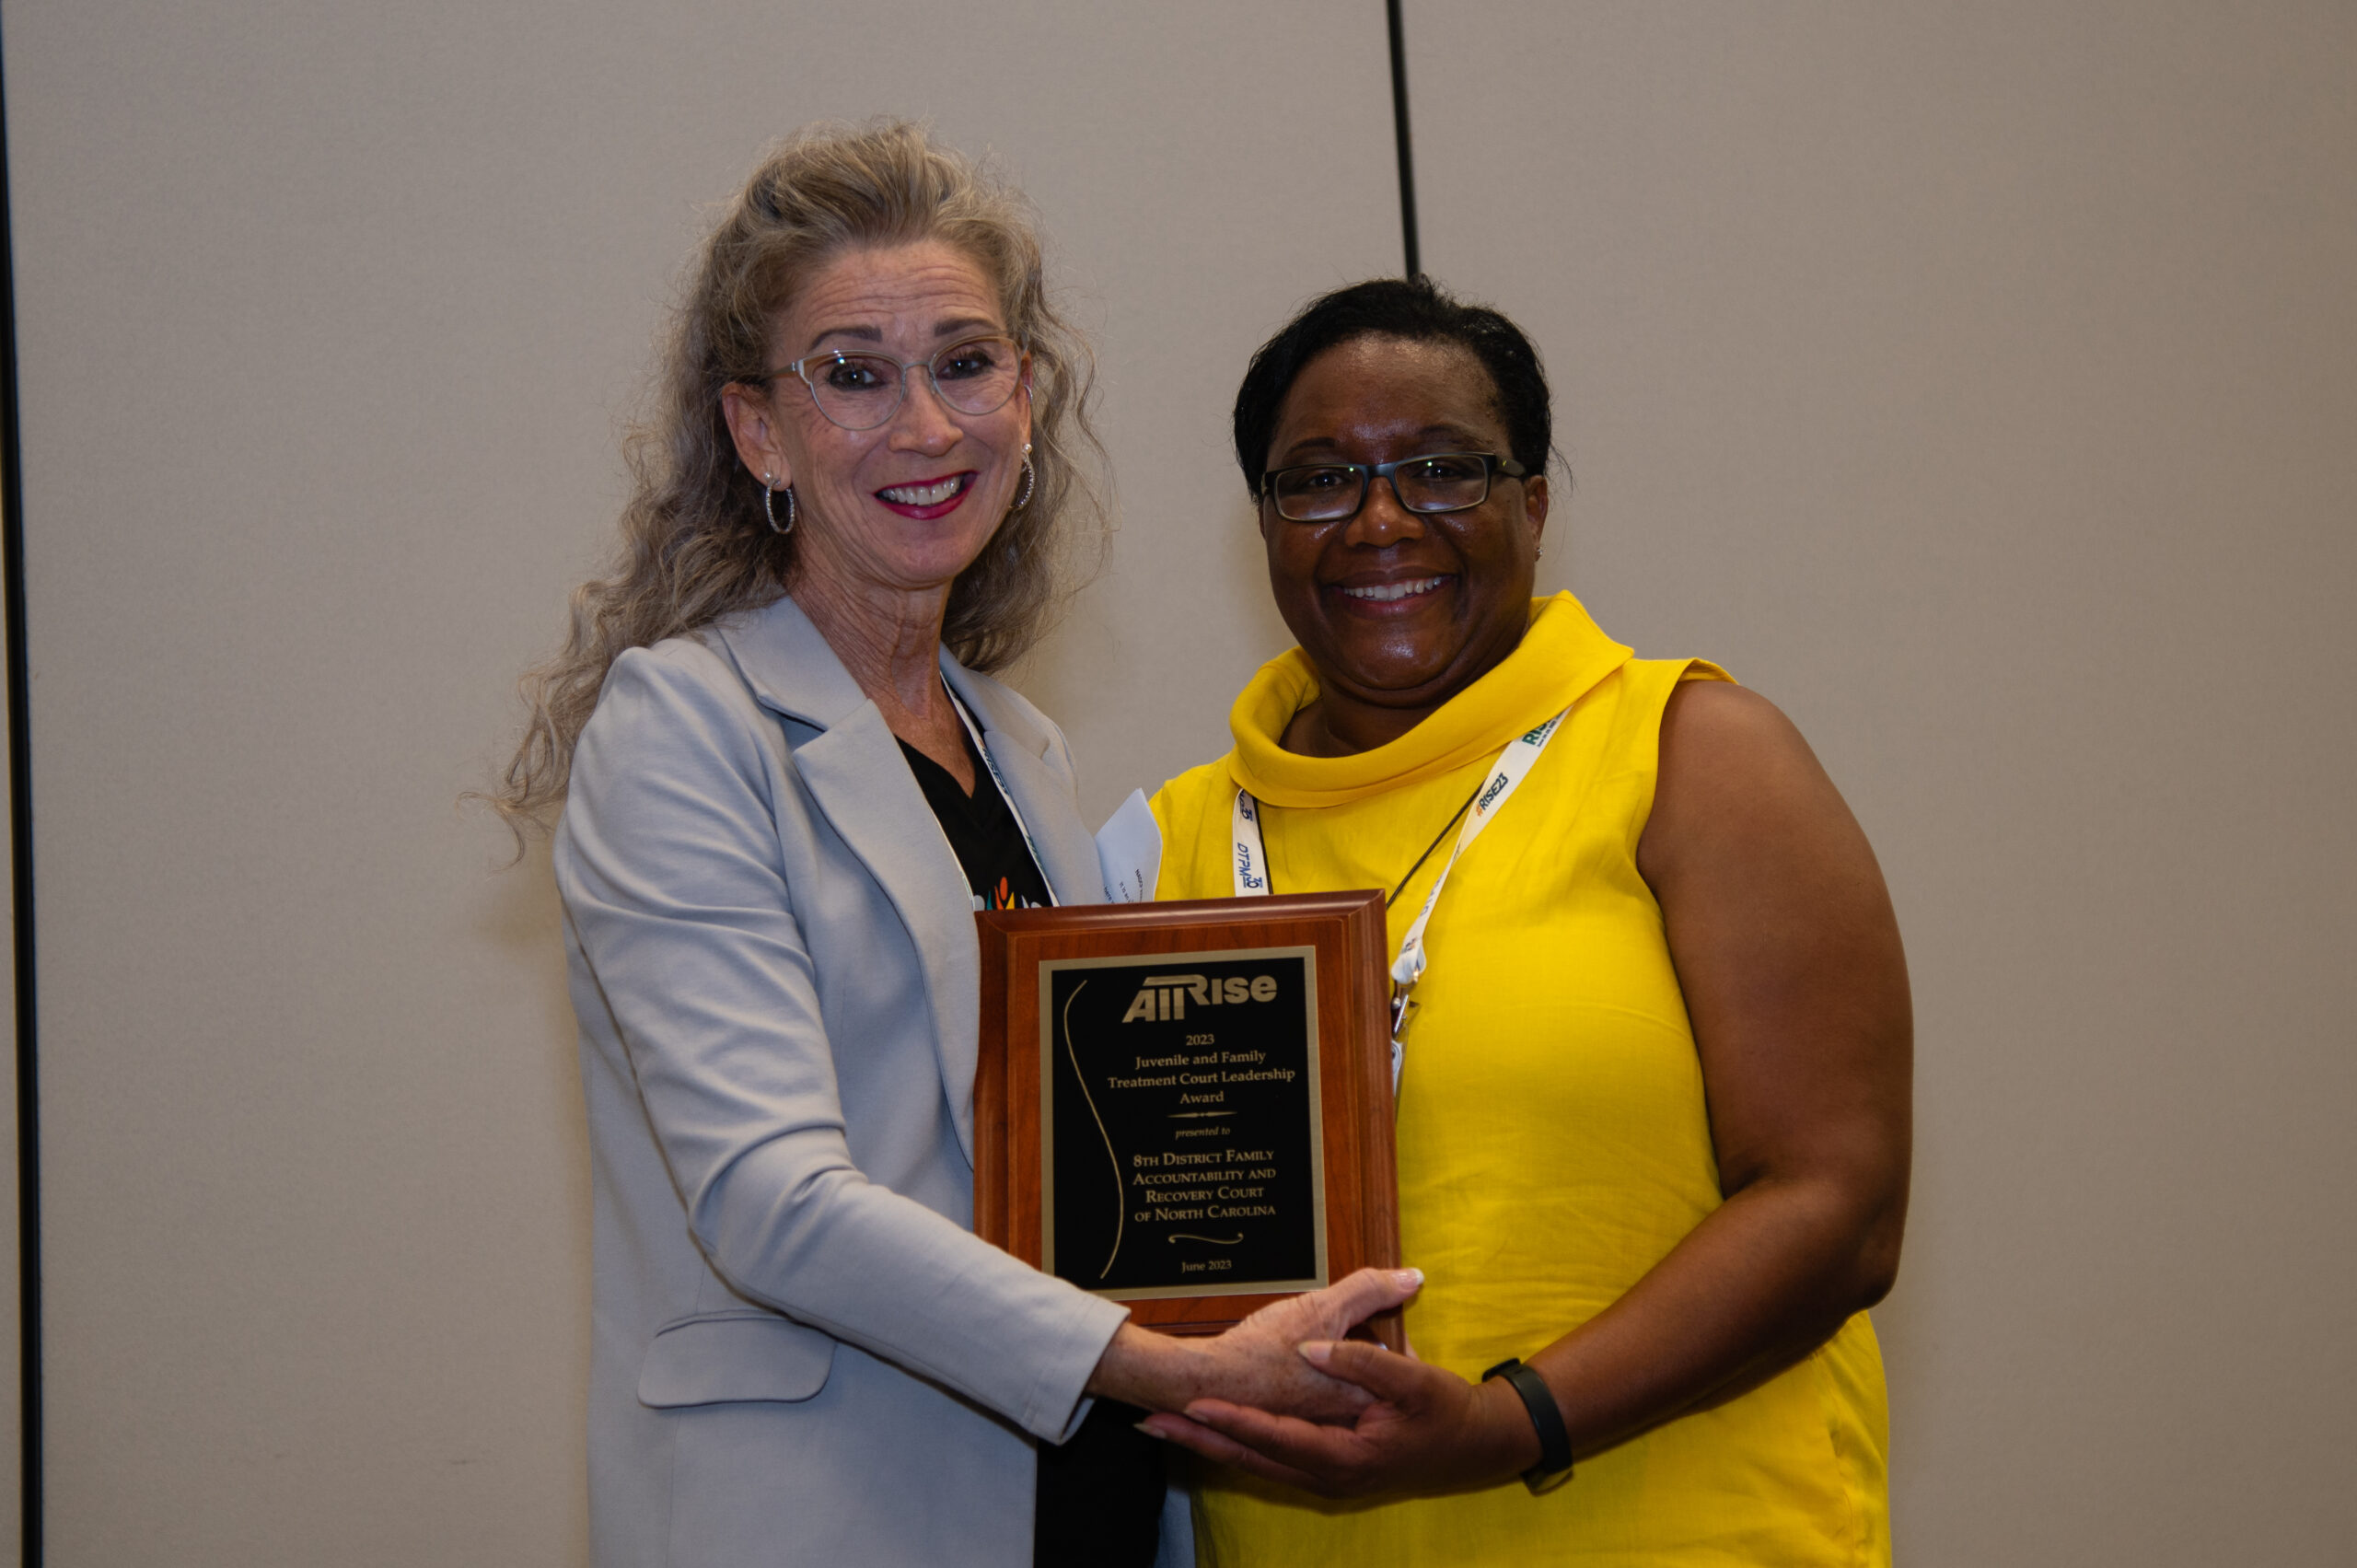 Presiding judge Elizabeth Heath accepts the award from All Rise Chief of Training and Research Carolyn Hardin.